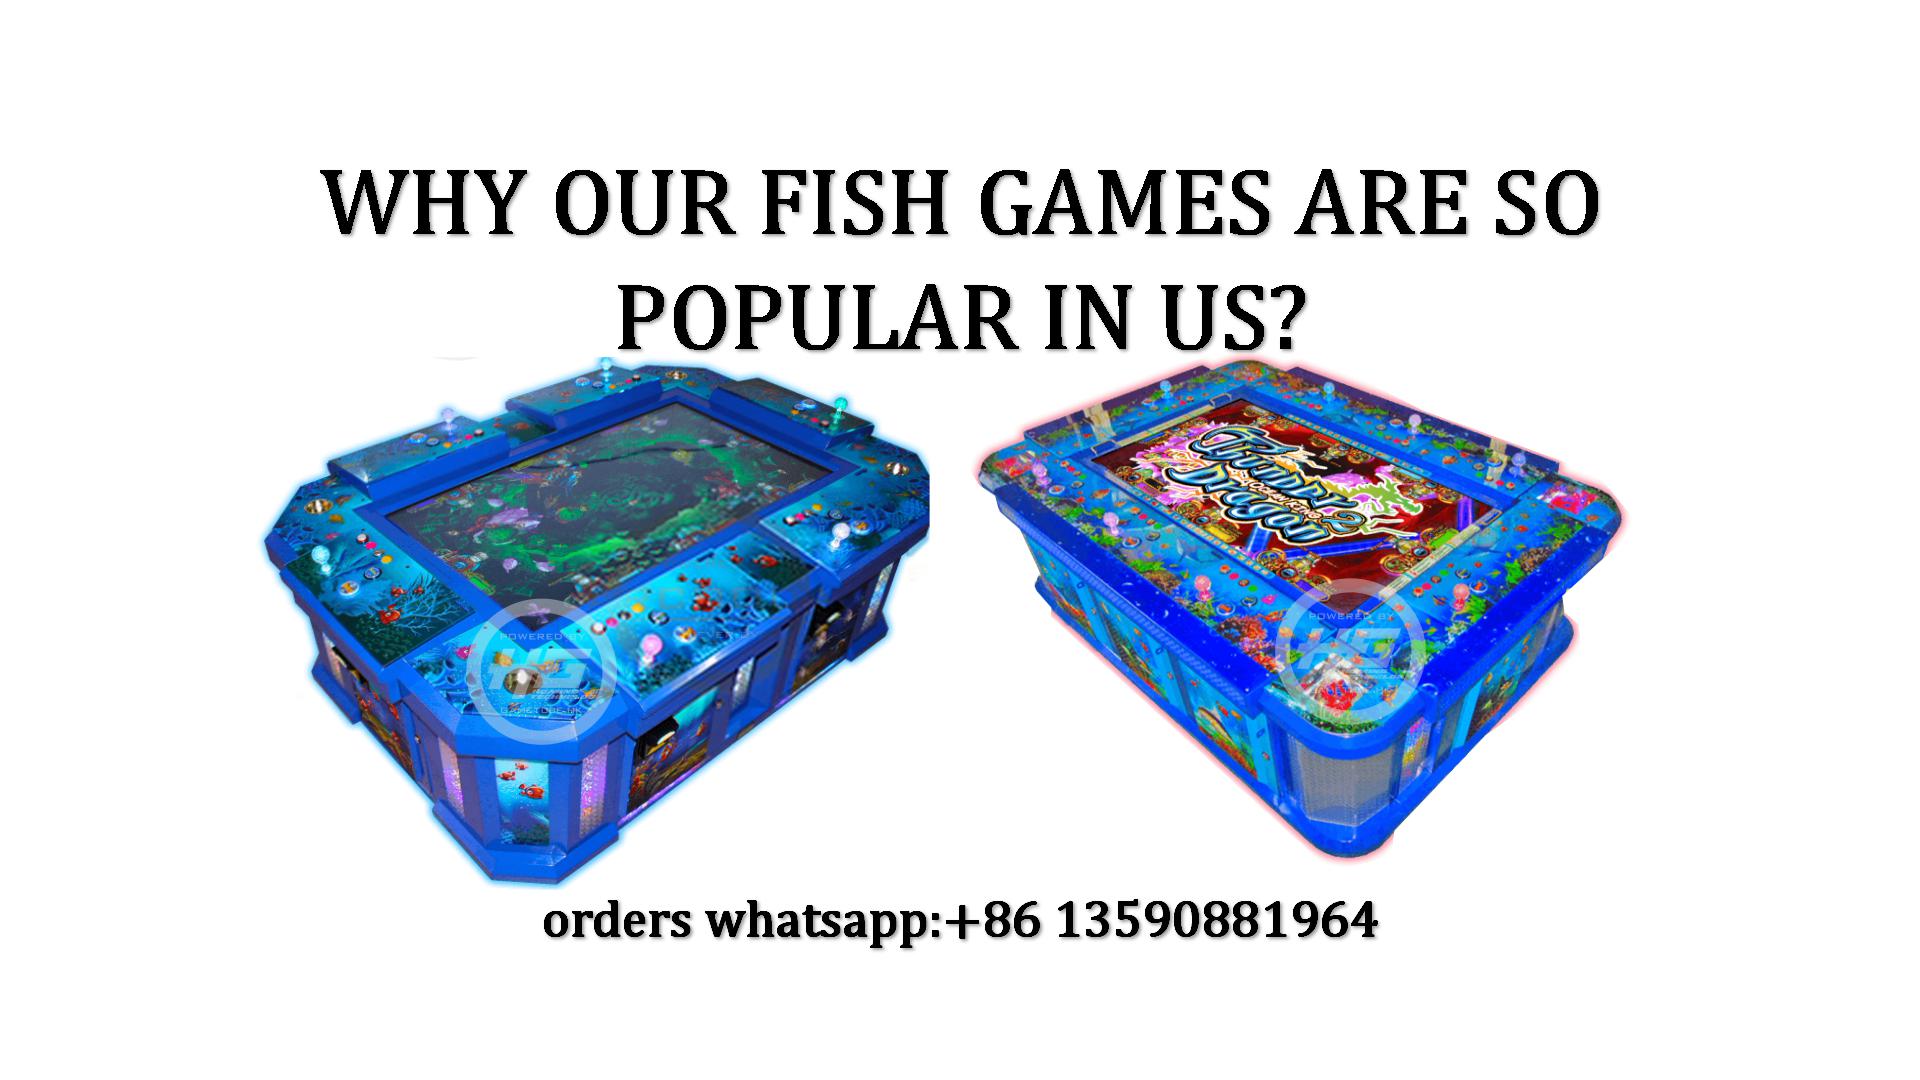 Why Our Fish Games Are So Popular in US Market?Ocean King 3 Plus,Fish Game Machine,Fish Table Game For Sale